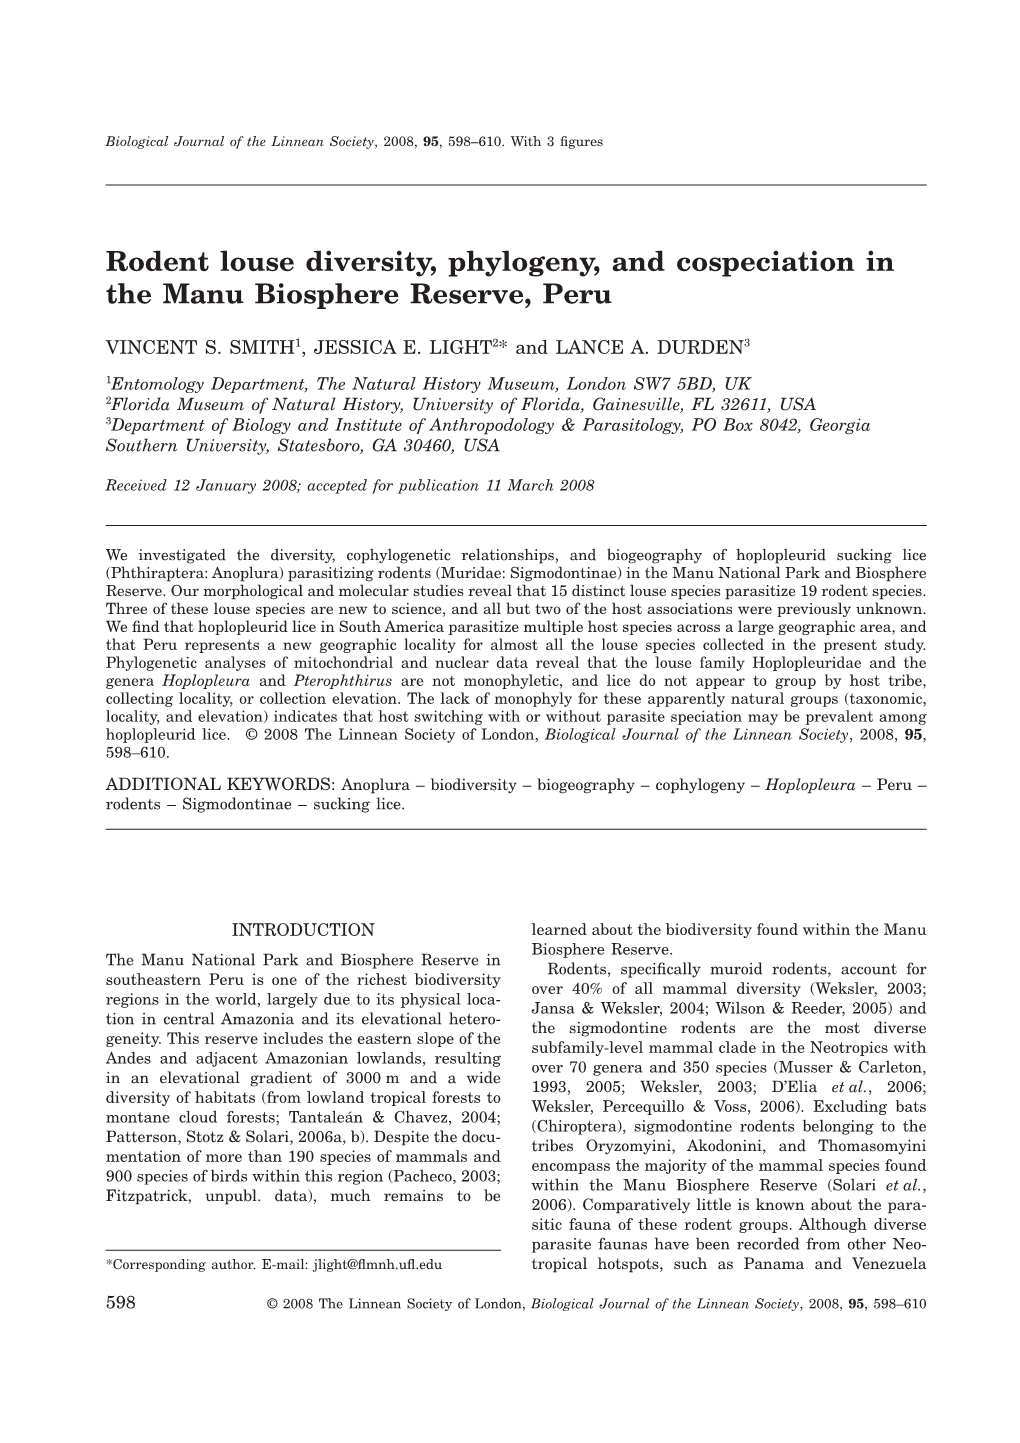 Rodent Louse Diversity, Phylogeny, and Cospeciation in the Manu Biosphere Reserve, Peru